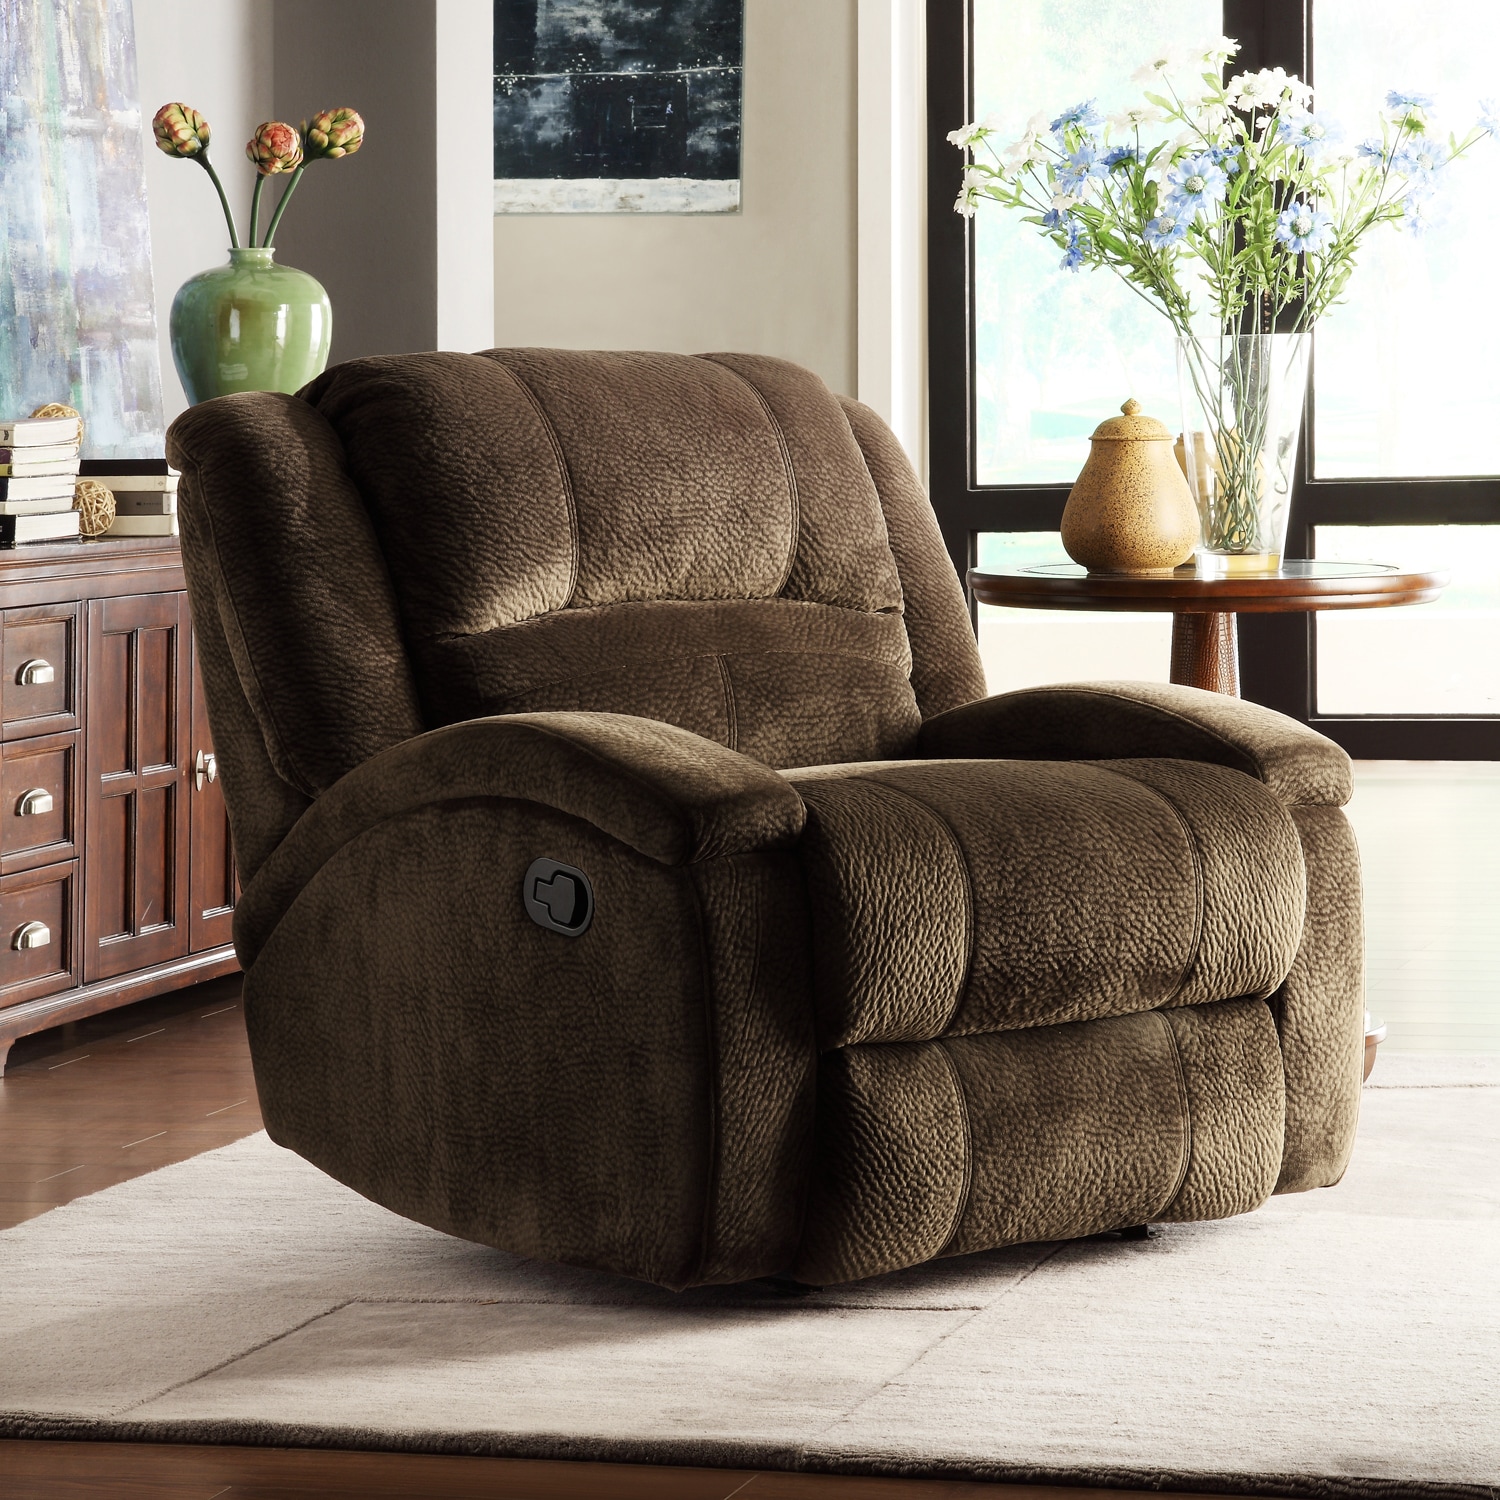 New Name Brand Brown Microfiber Recliner Chair Soft Plush Reclining Chairs